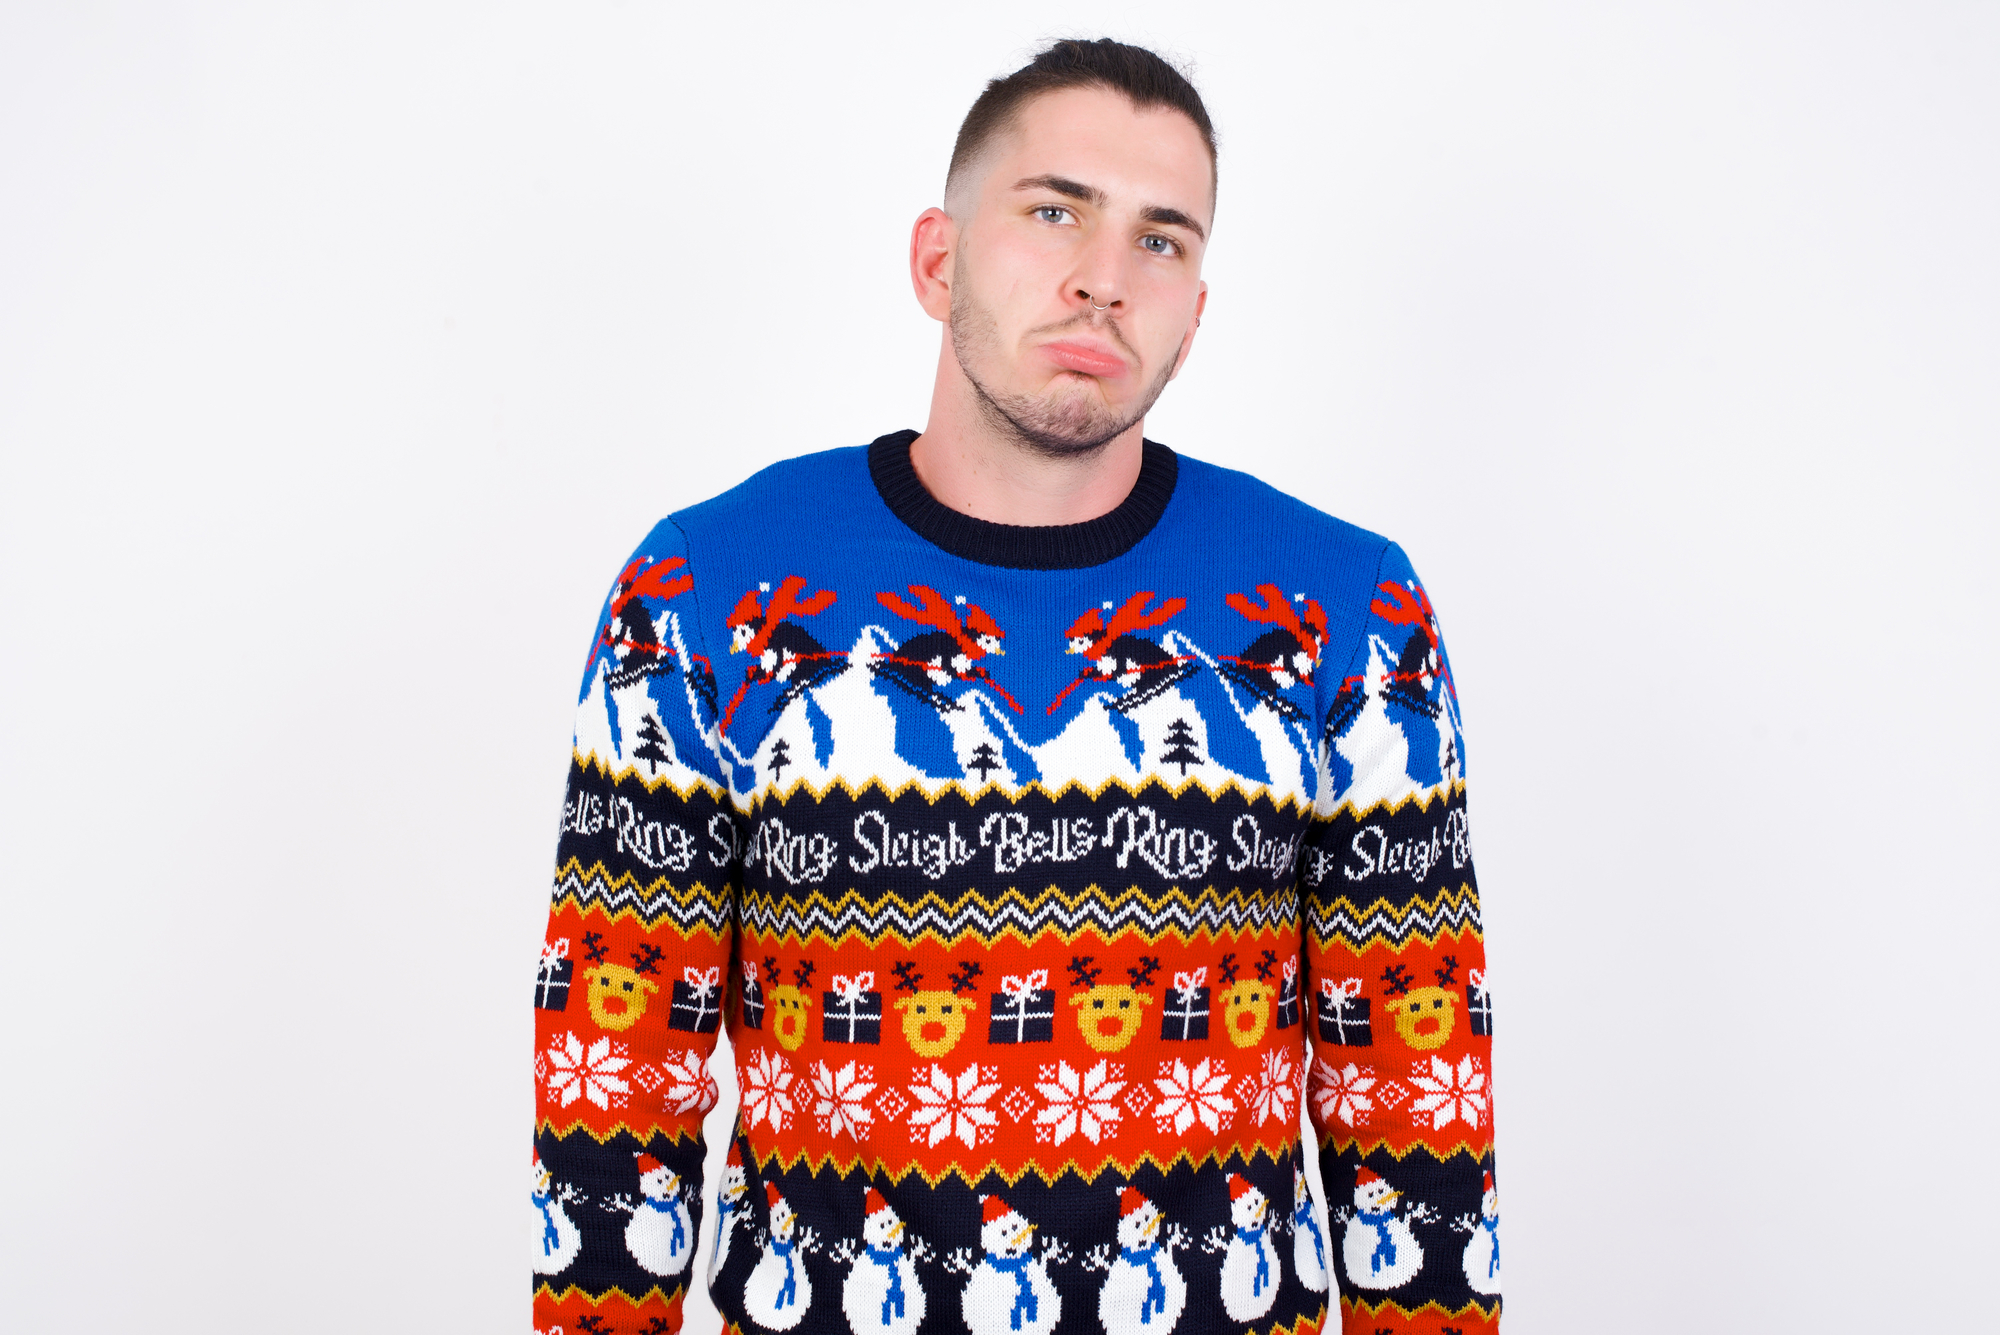 An man wearing an ugly Christmas sweater ultimately dominates the official bar crawl.